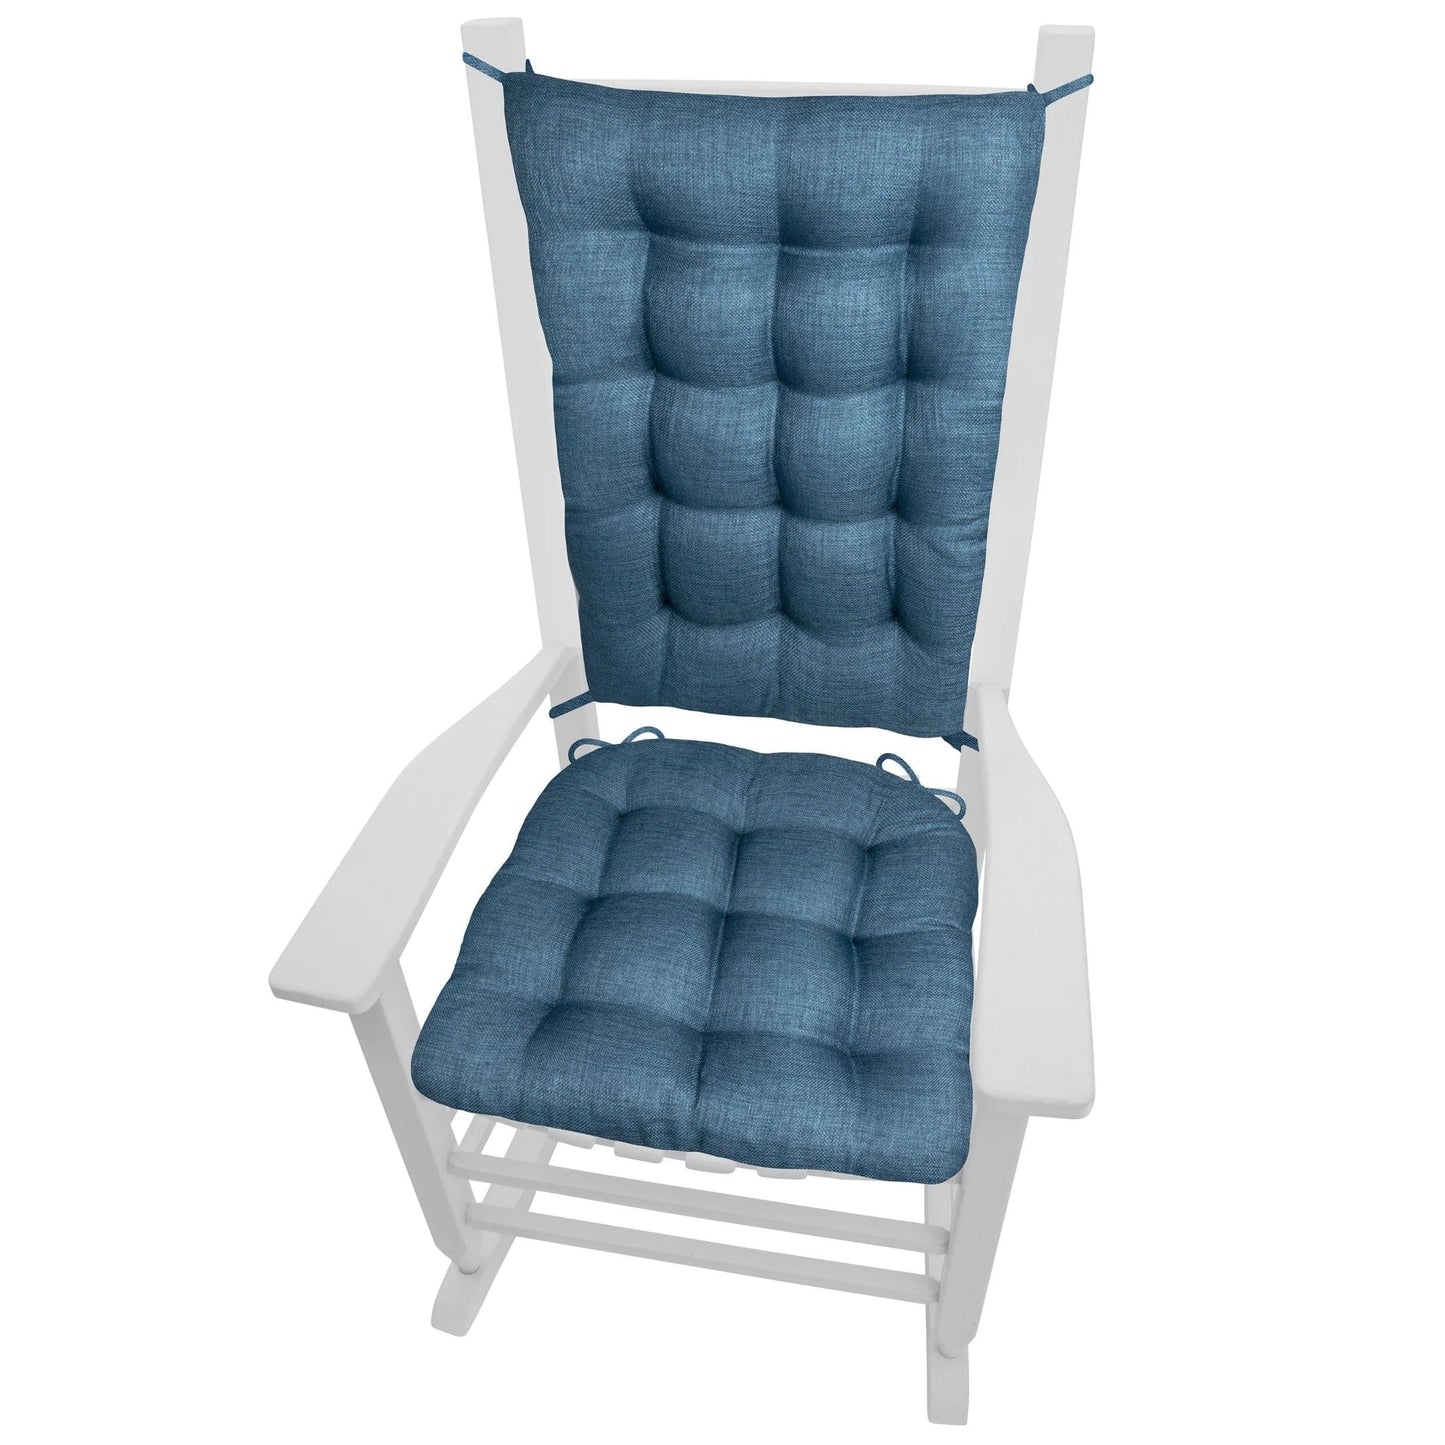 Rave Pacific Blue Indoor/Outdoor Rocking Chair Cushions | Barnett Home Decor | Blue